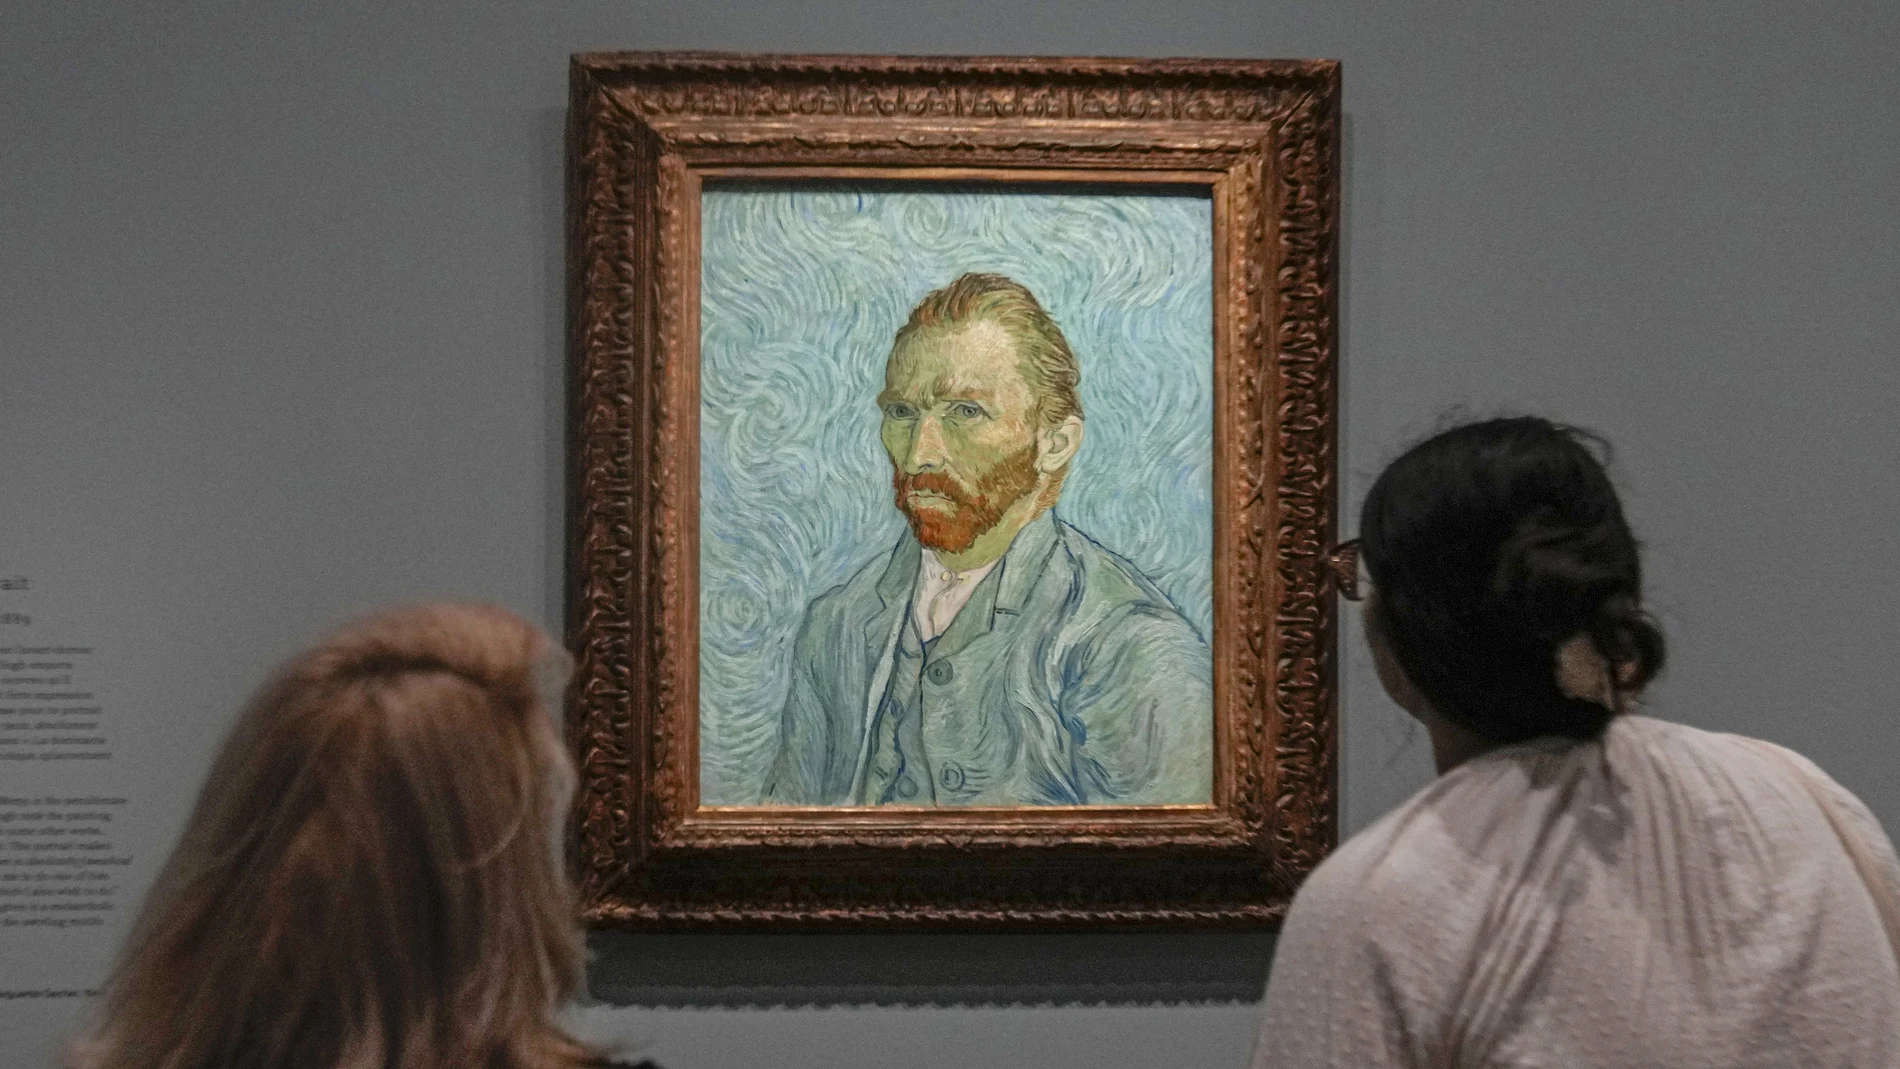 People look at Vincent Van Gogh's oil on canvas painting, Self-portrait, 1889, during the press day of the "Van Gogh in Auvers-sur-Oise: The Final Months" exhibition at the Musee d'Orsay in Paris, Friday, Sept. 29, 2023.